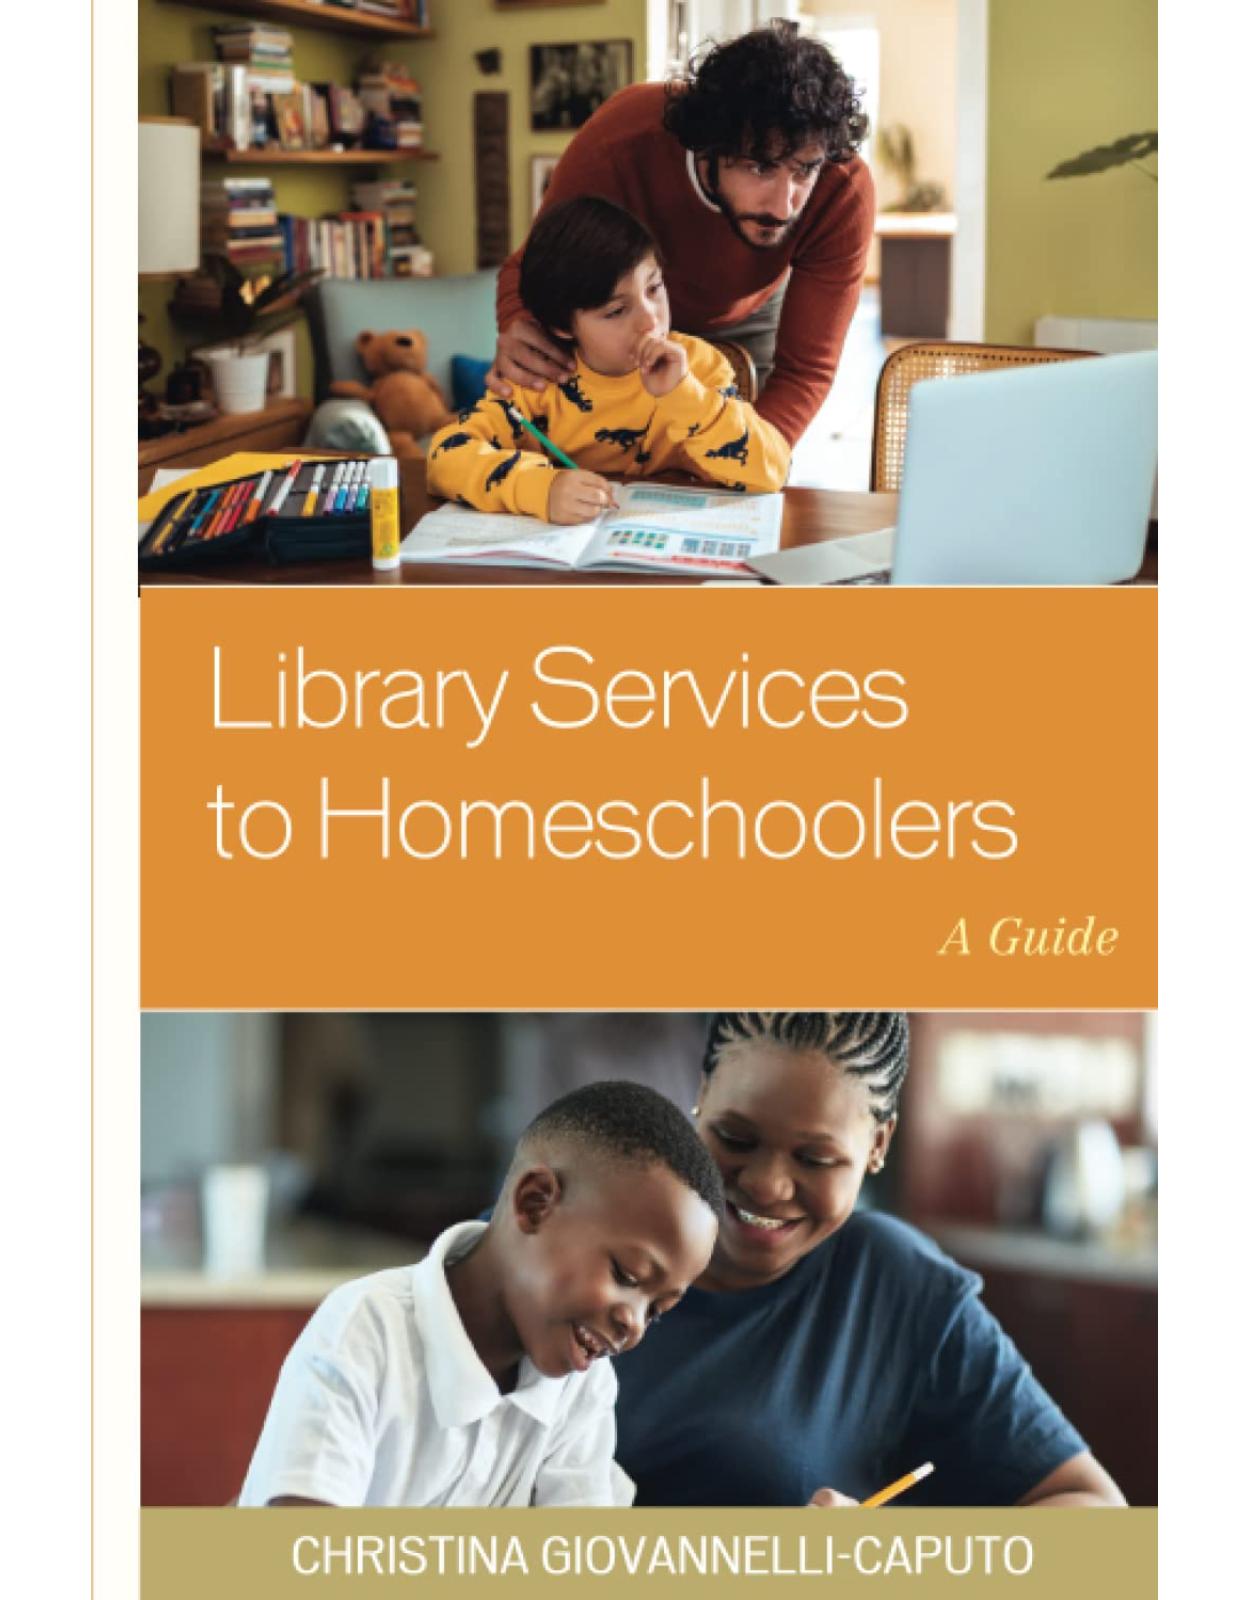 Library Services to Homeschoolers: A Guide